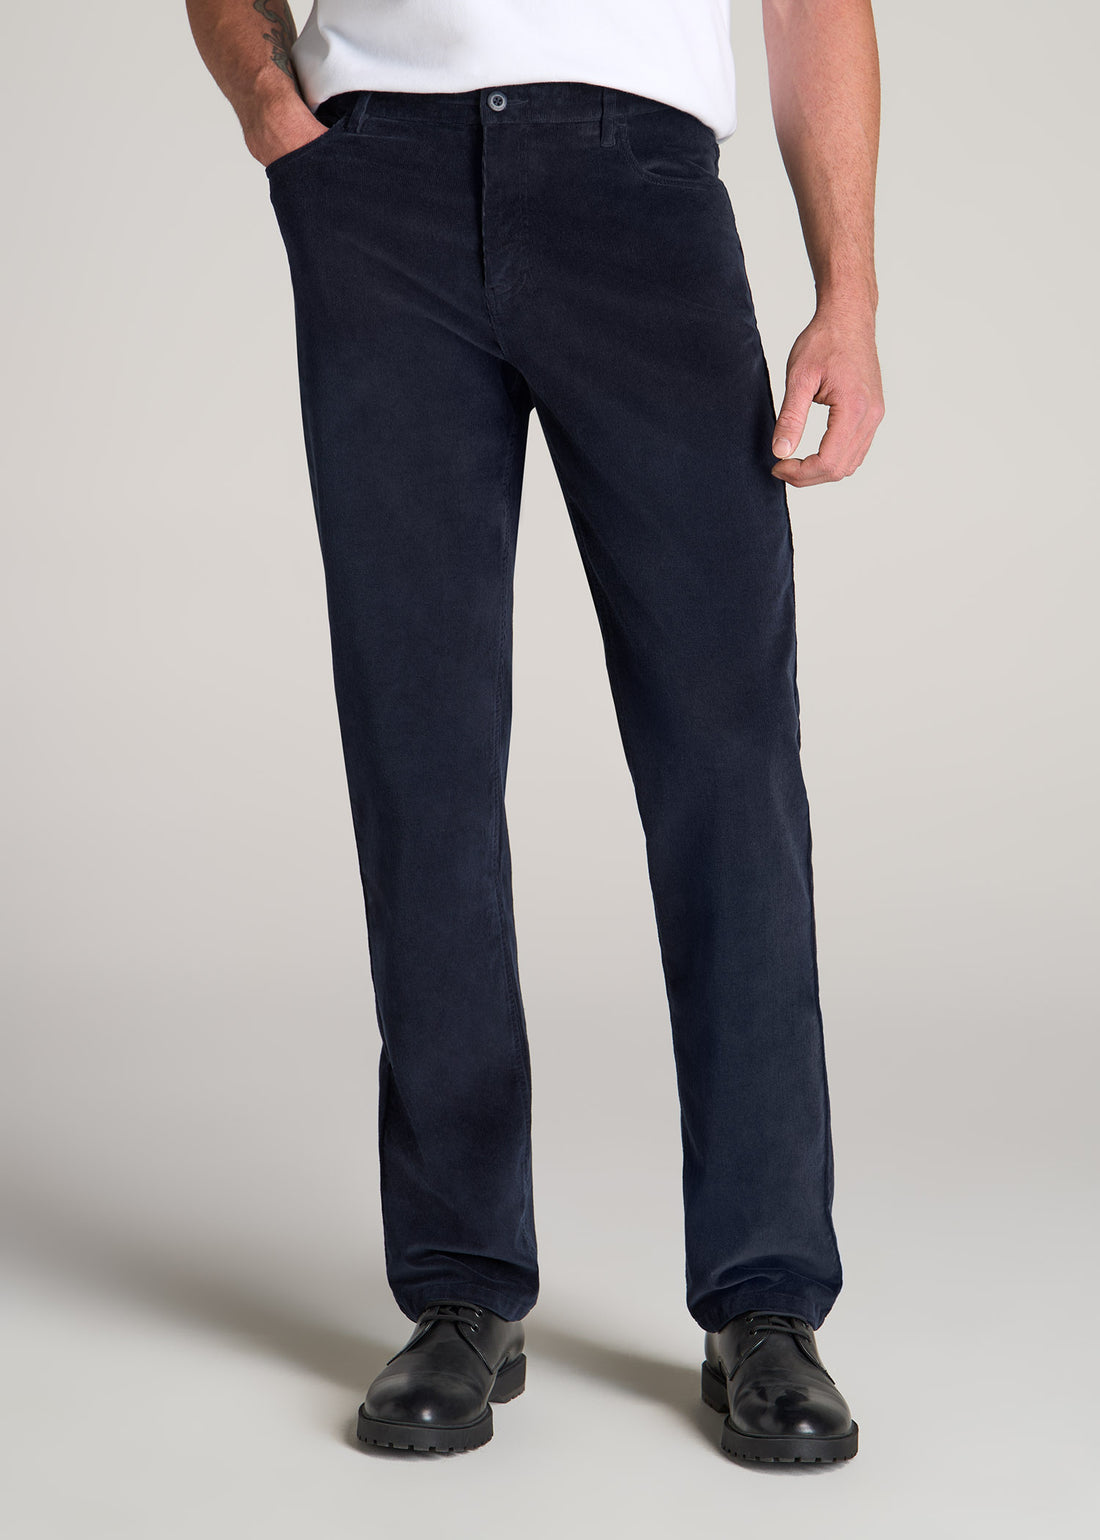 Tall man wearing American Tall's J1 Stretch Corduroy in Evening Blue